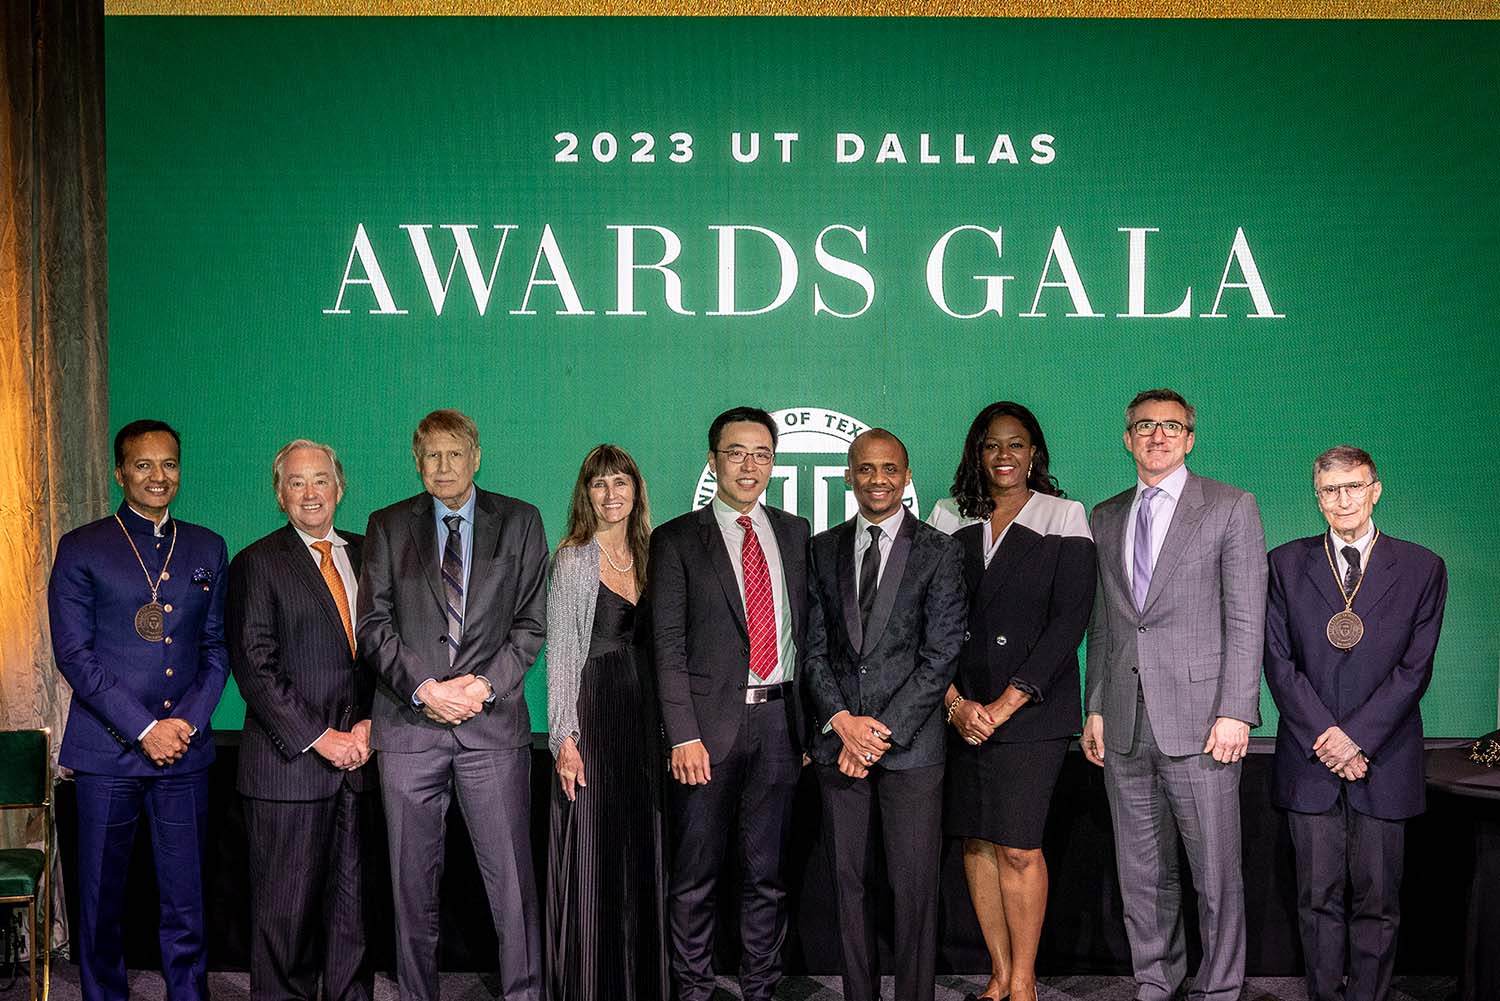 UTD Honors Alumni, Supporters at Star-Studded Awards Gala